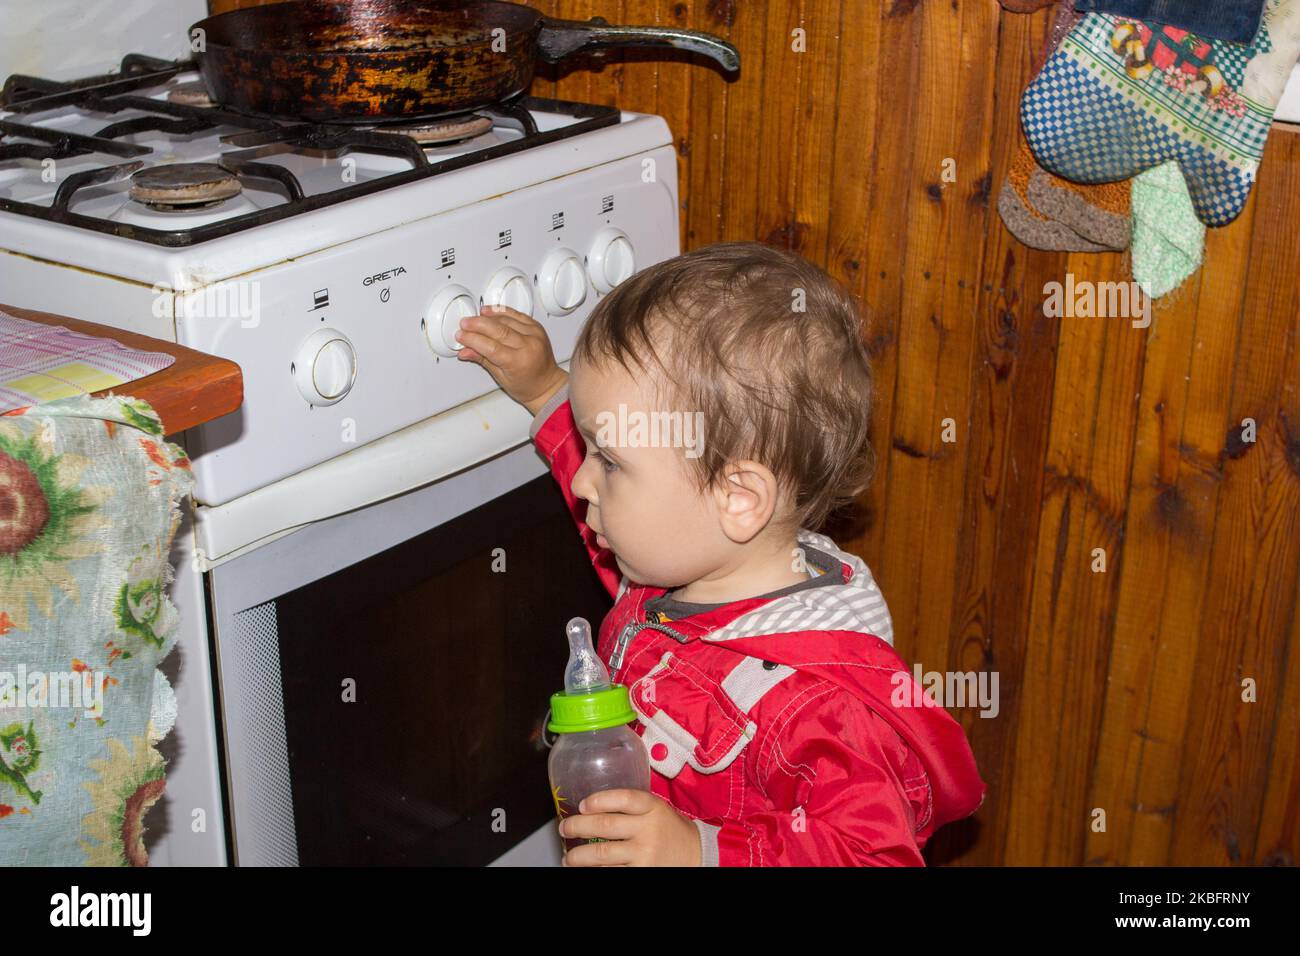 The child unattended playing in the kitchen with a gas stove. Stock Photo